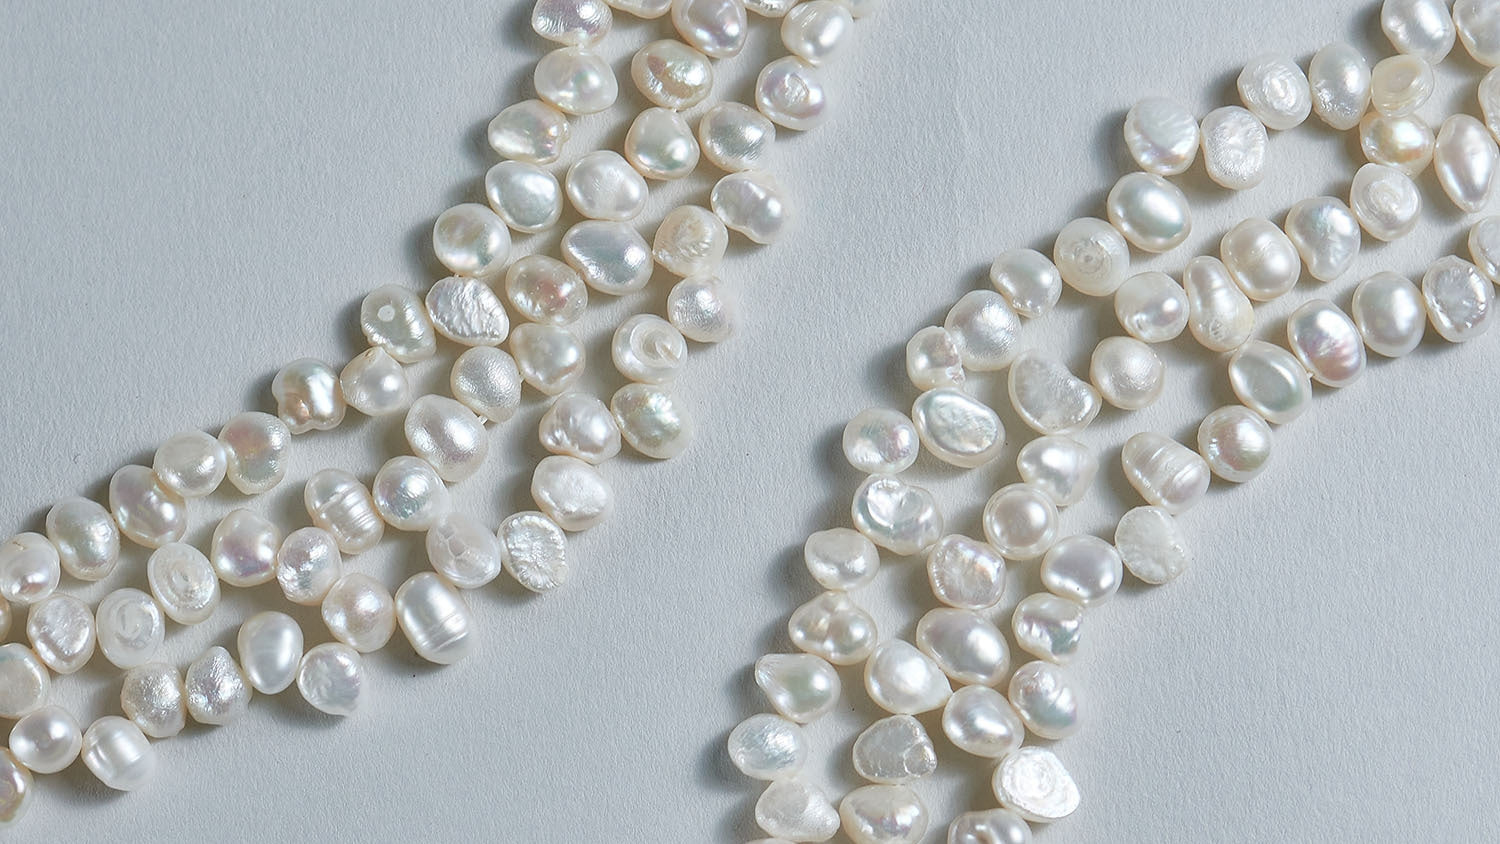 The image shows two rows of loose baroque freshwater pearls with grey background.